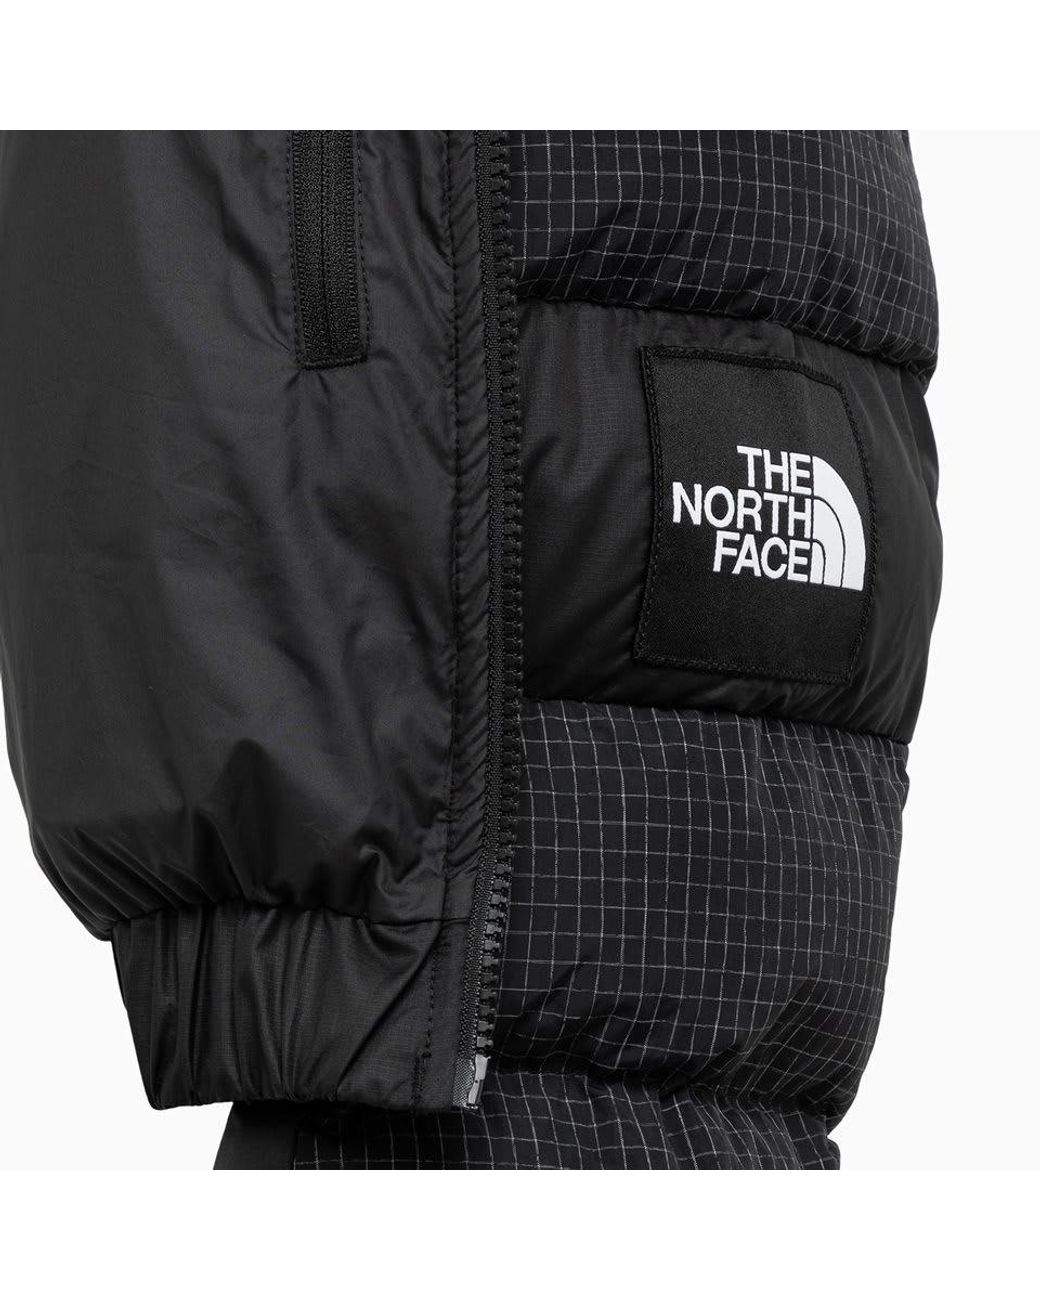 The North Face – Rusta 2.0 Puffer Jacket Black - Size Xs